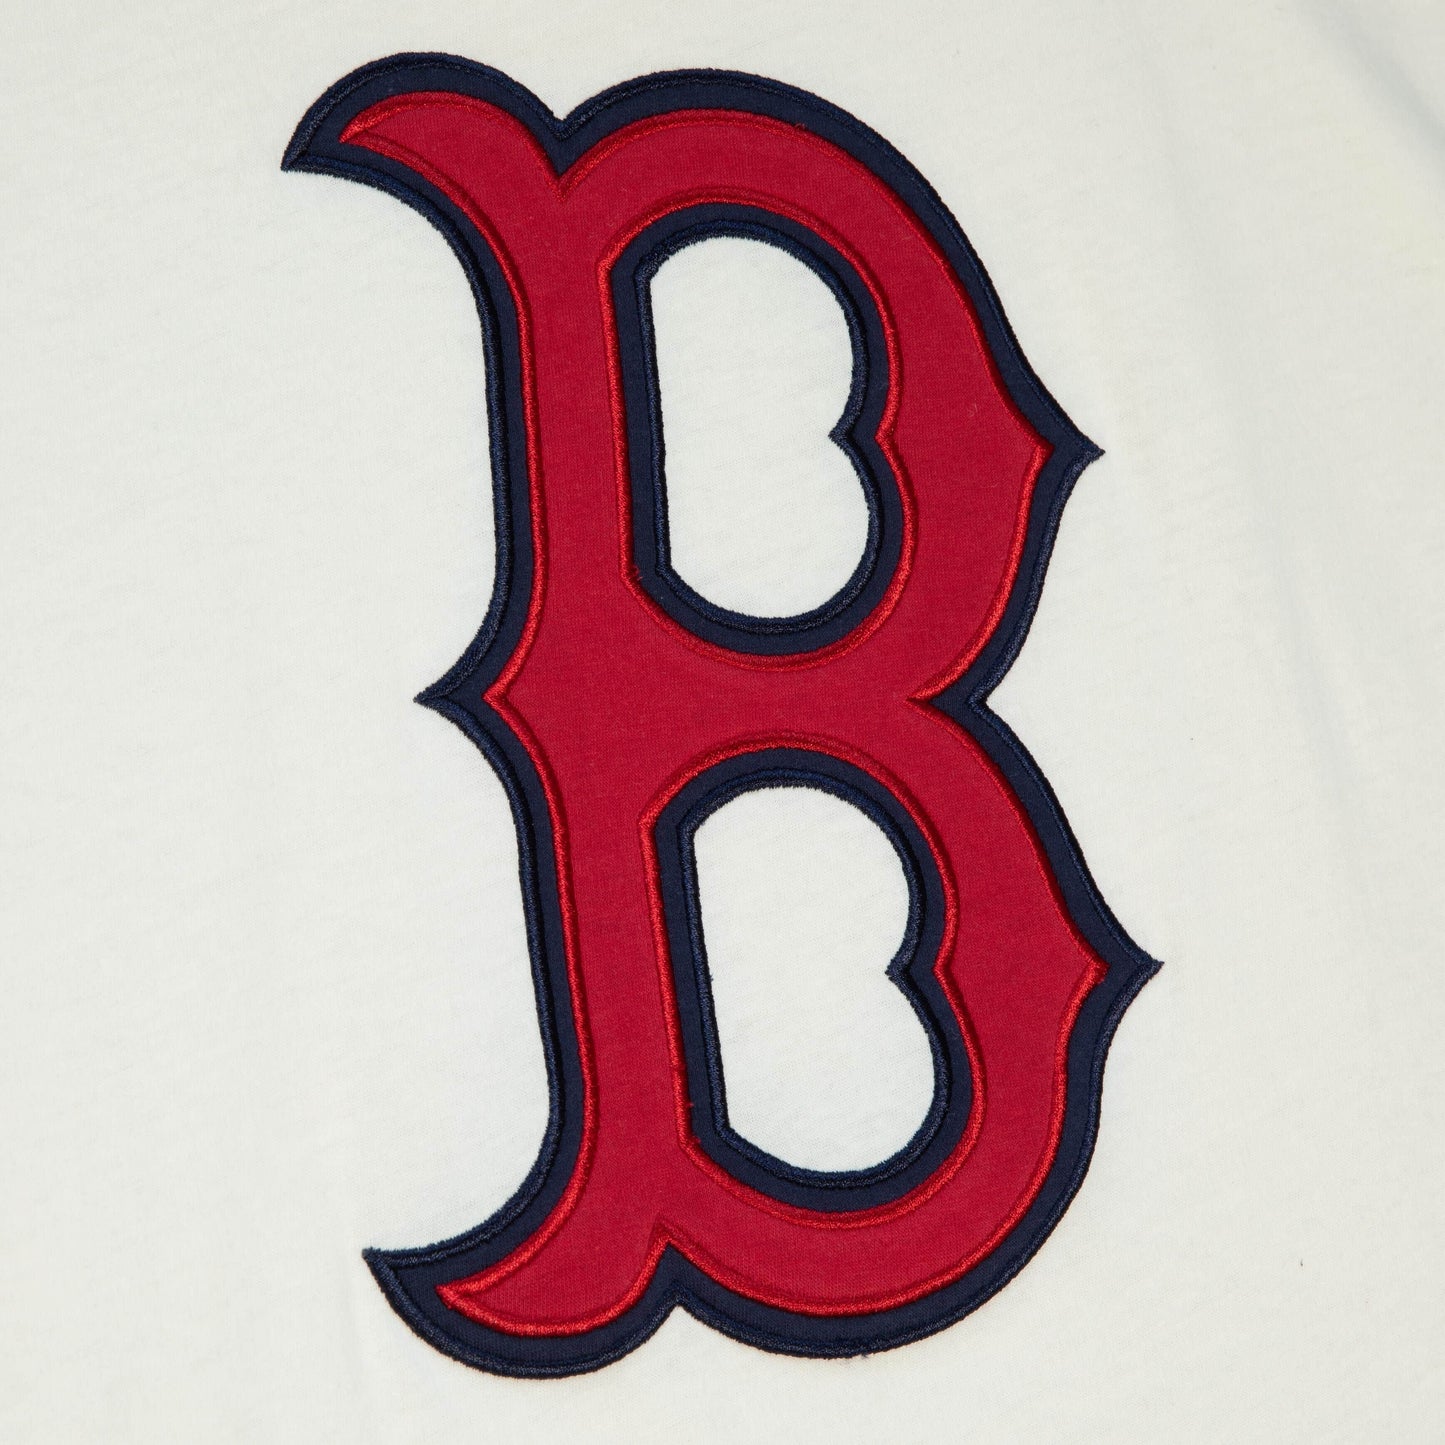 Boston Red Sox Mitchell & Ness Cooperstown Collection Color Block T-Shirt